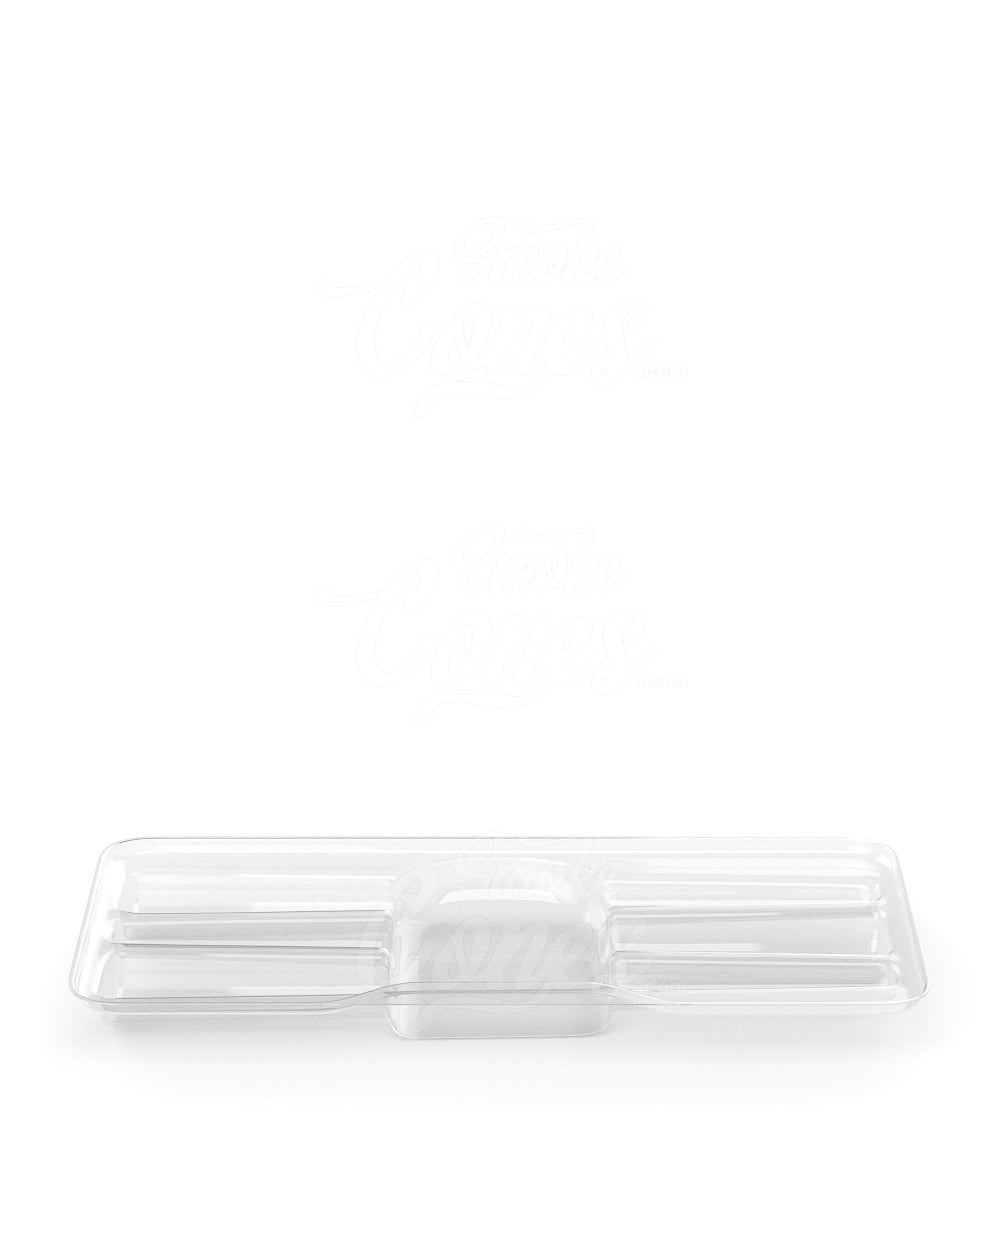 Clear Edible & Joint Box Plastic Insert Tray for 3 King Size 109mm Pre Rolled Cones 100/Box - 4